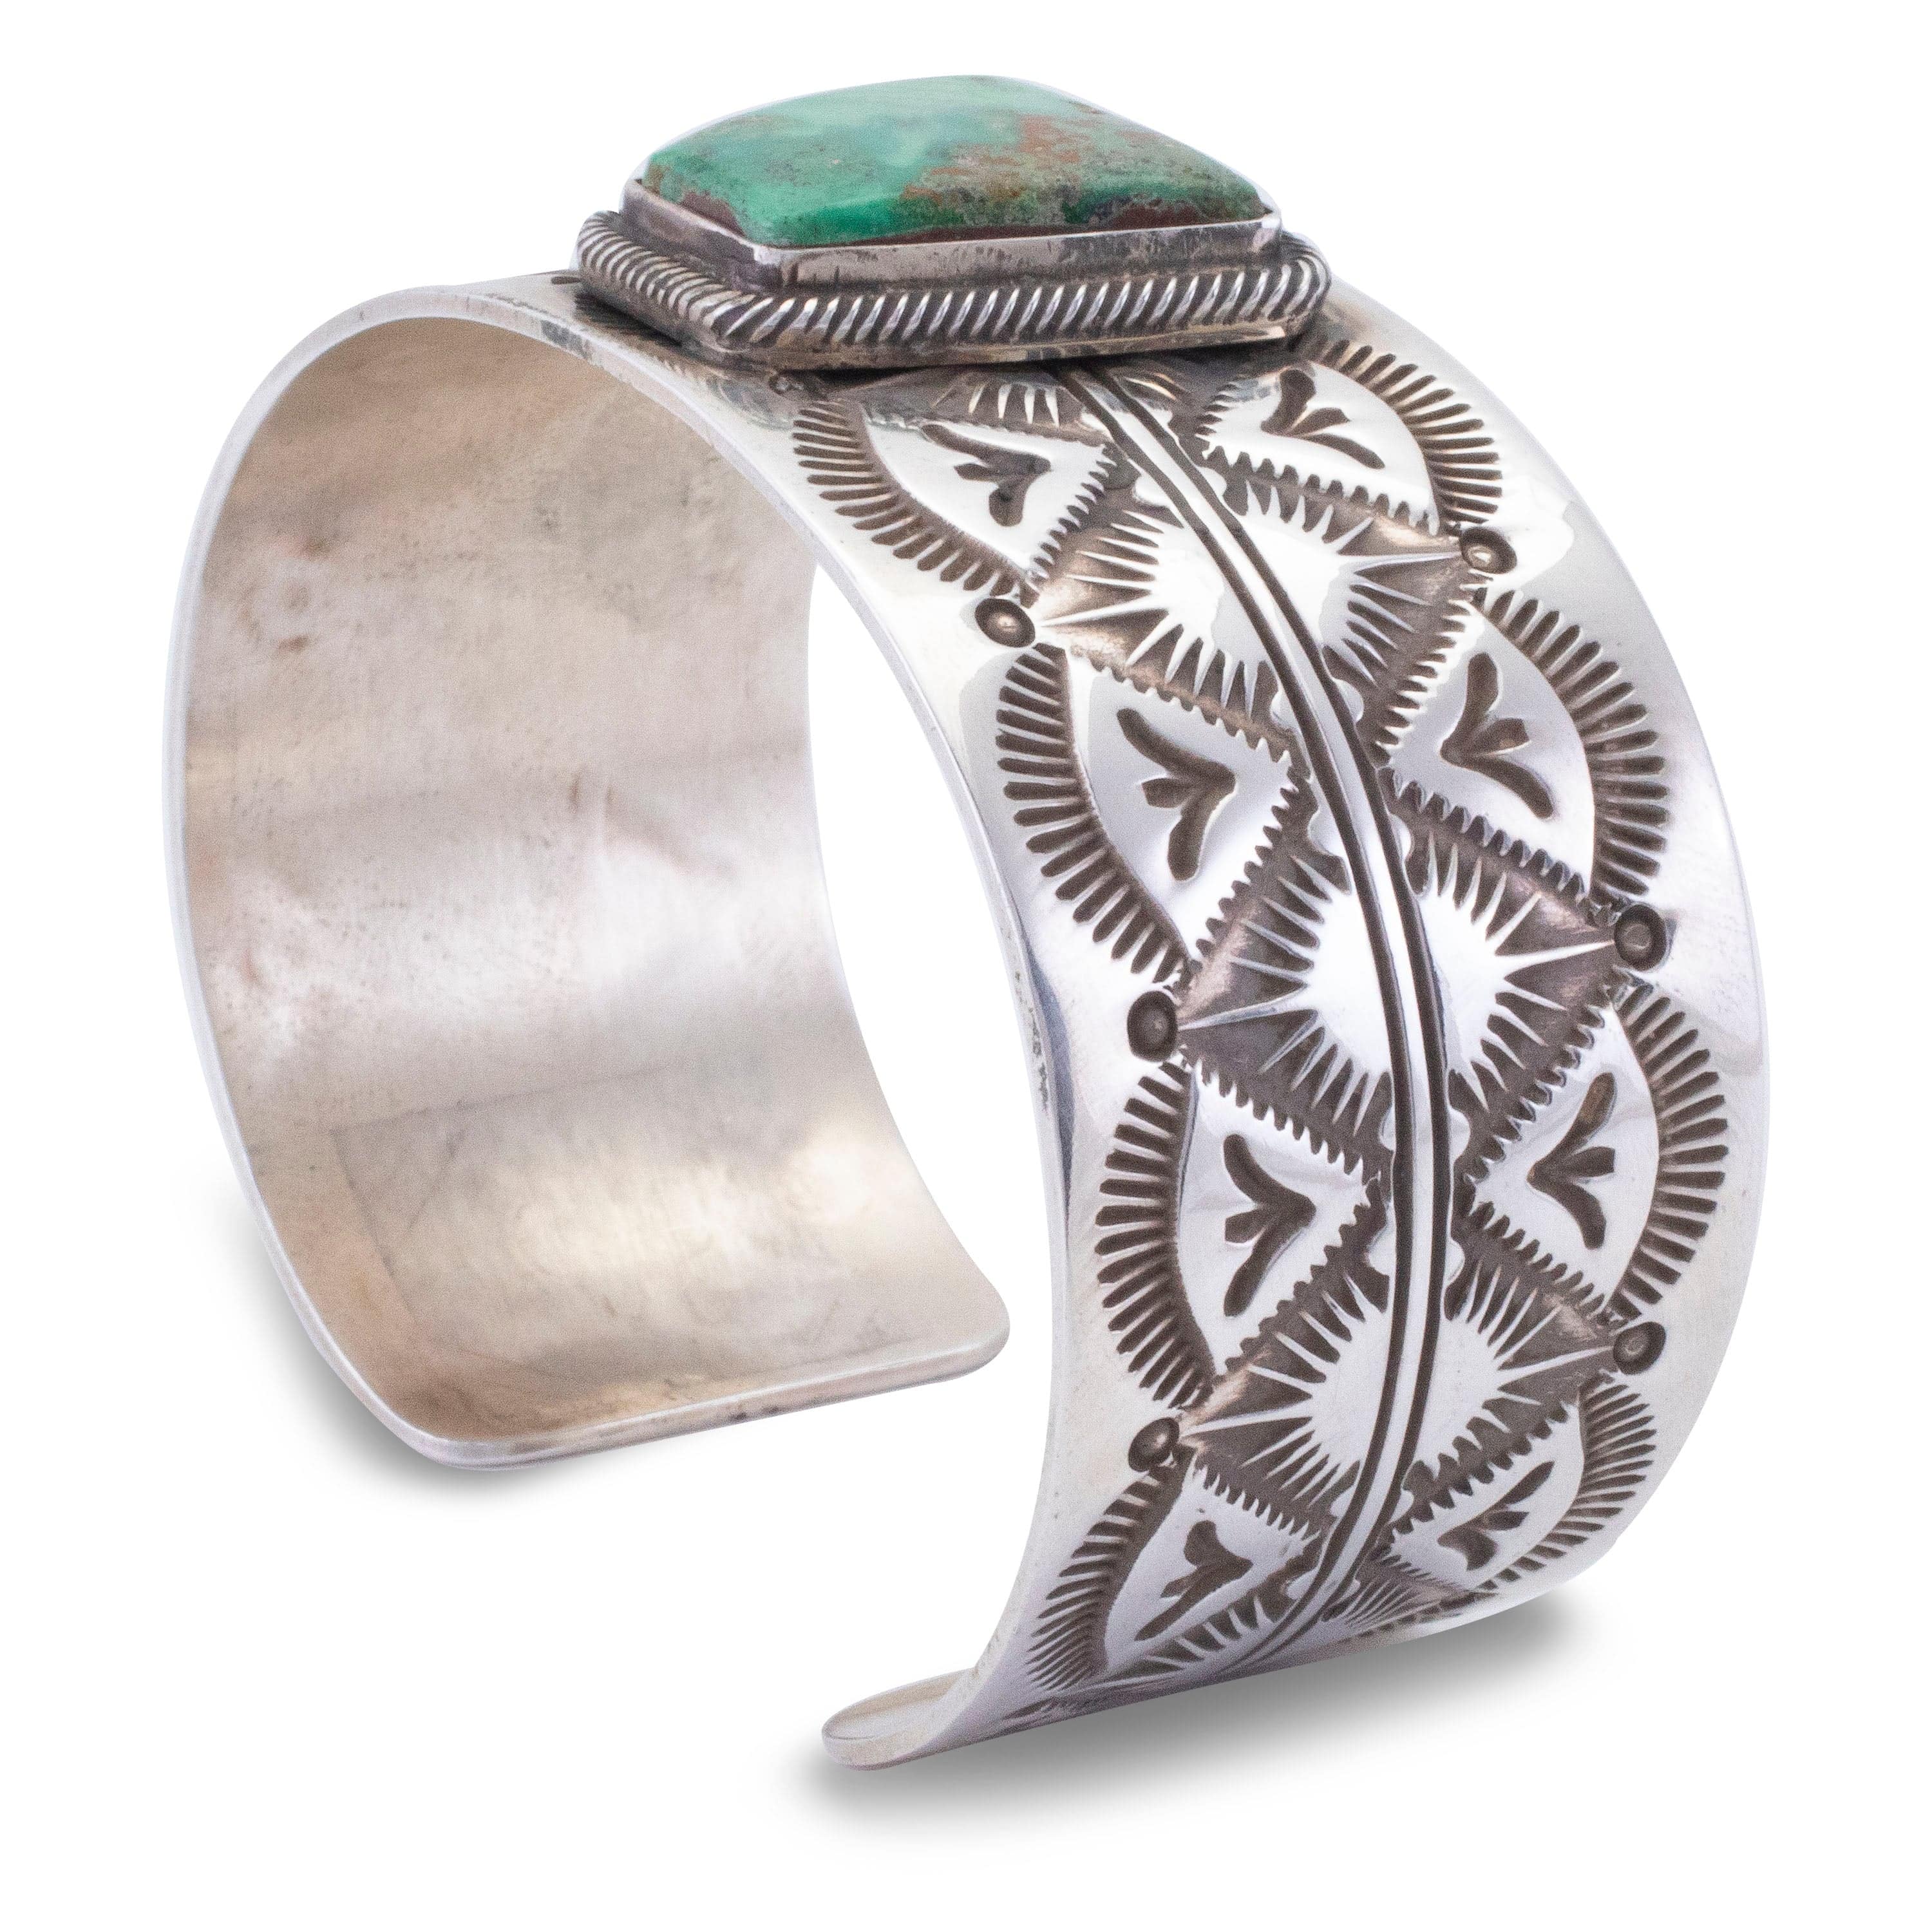 Kalifano Native American Jewelry Larry Martinez Emerald Valley Turquoise USA Native American Made 925 Sterling Silver Cuff NAB2700.012